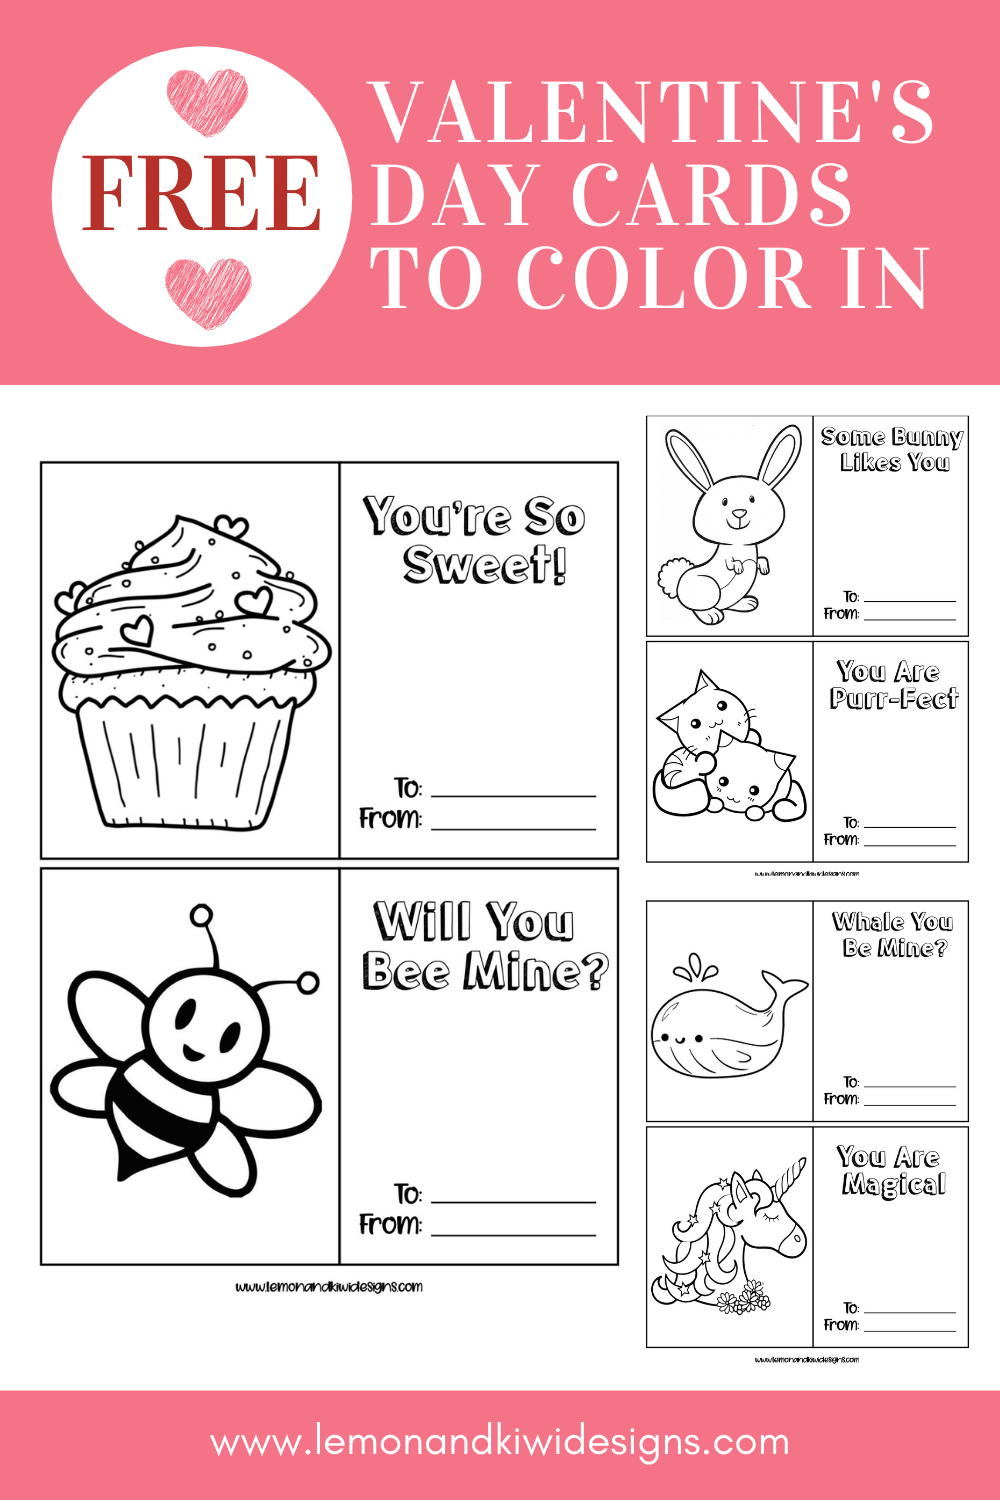 Free Valentine’s Day Cards to Color In {Printable Valentine’s Coloring Pages}